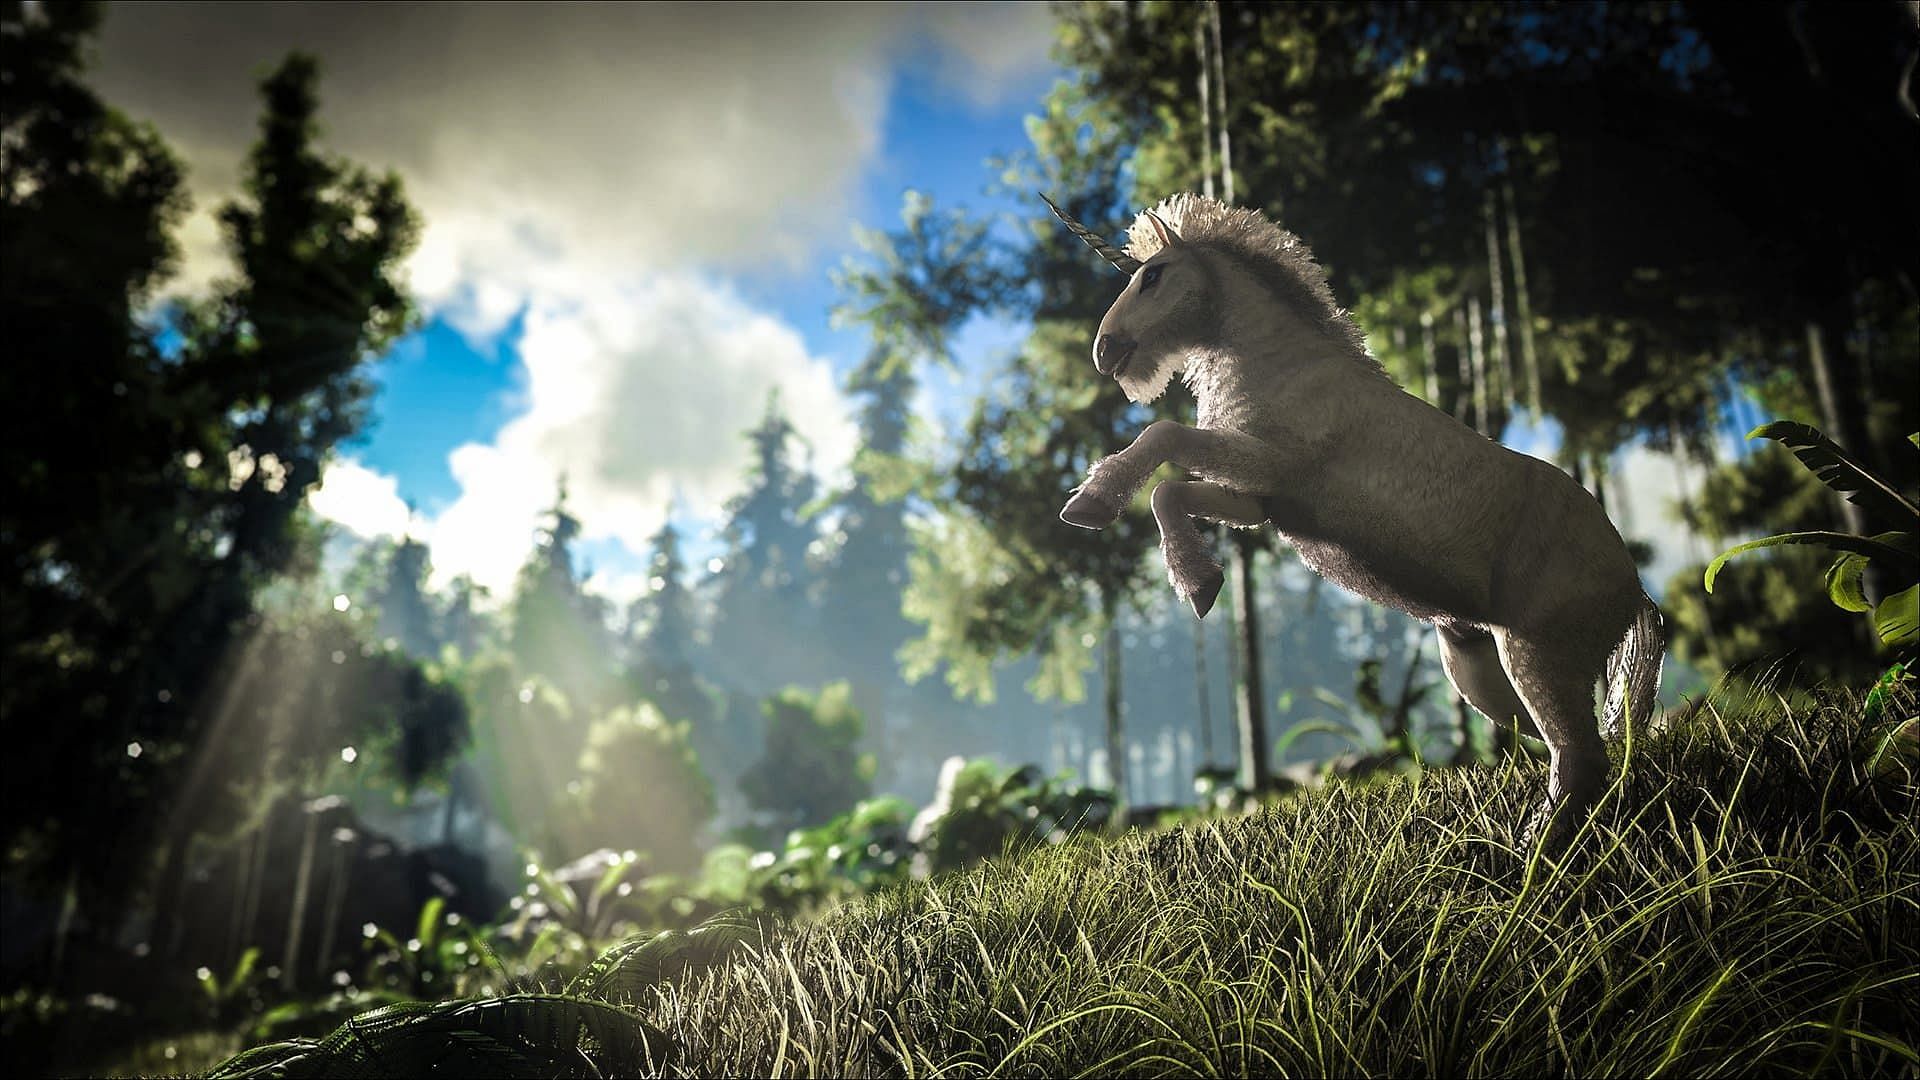 The elusive Equus in ARK Survival Ascended